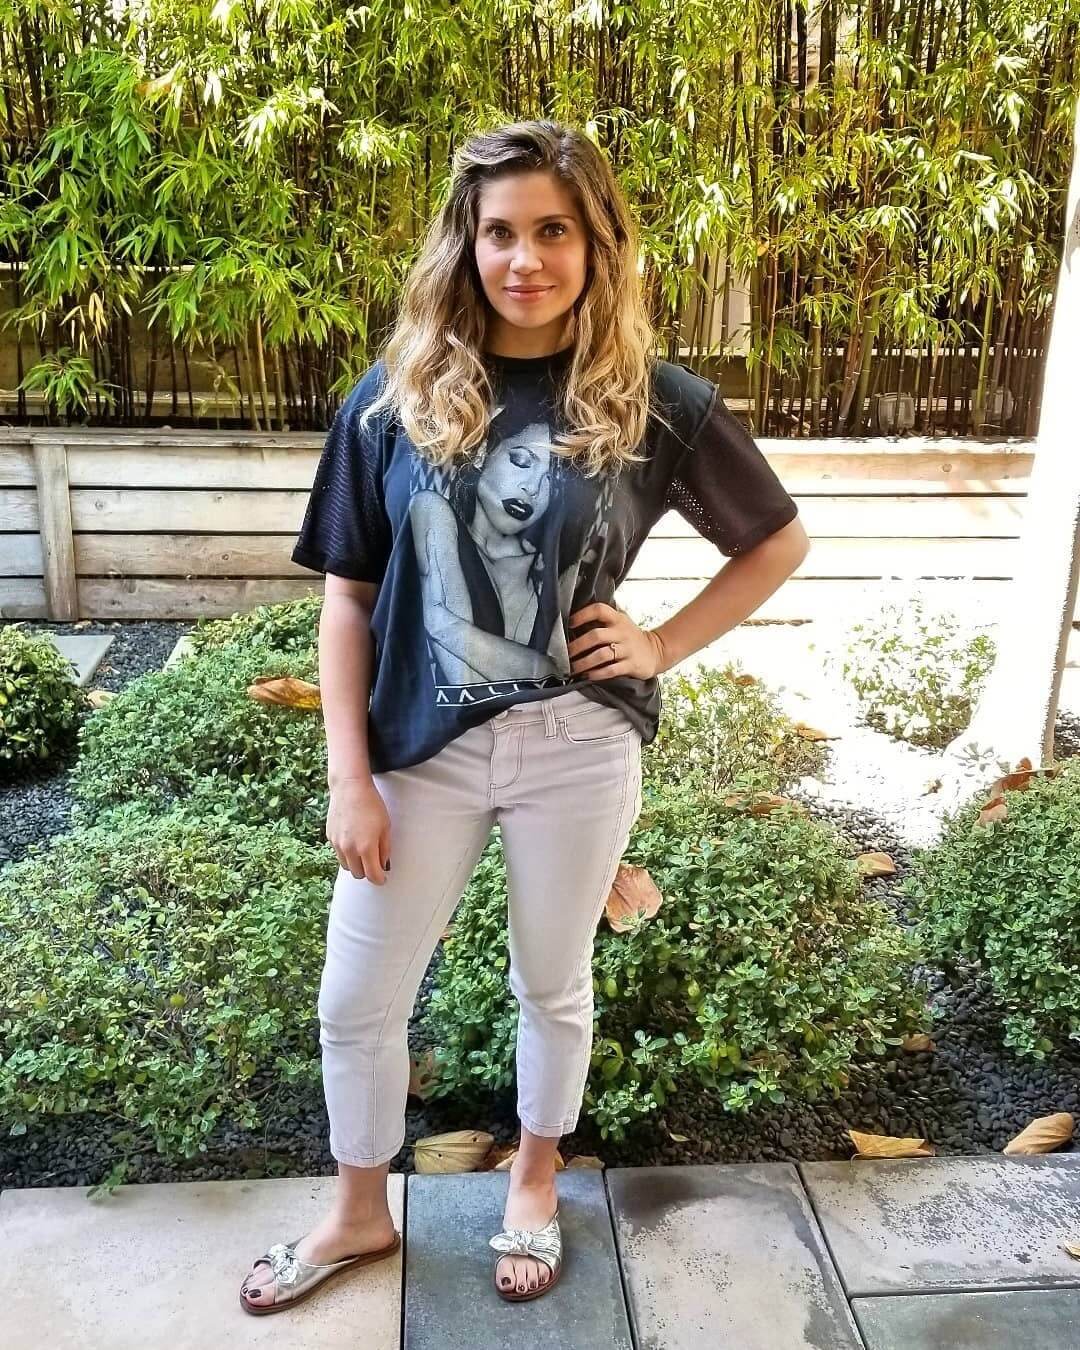 49 Sexy Danielle Fishel Feet Pictures Are Heaven On Earth | Best Of Comic Books